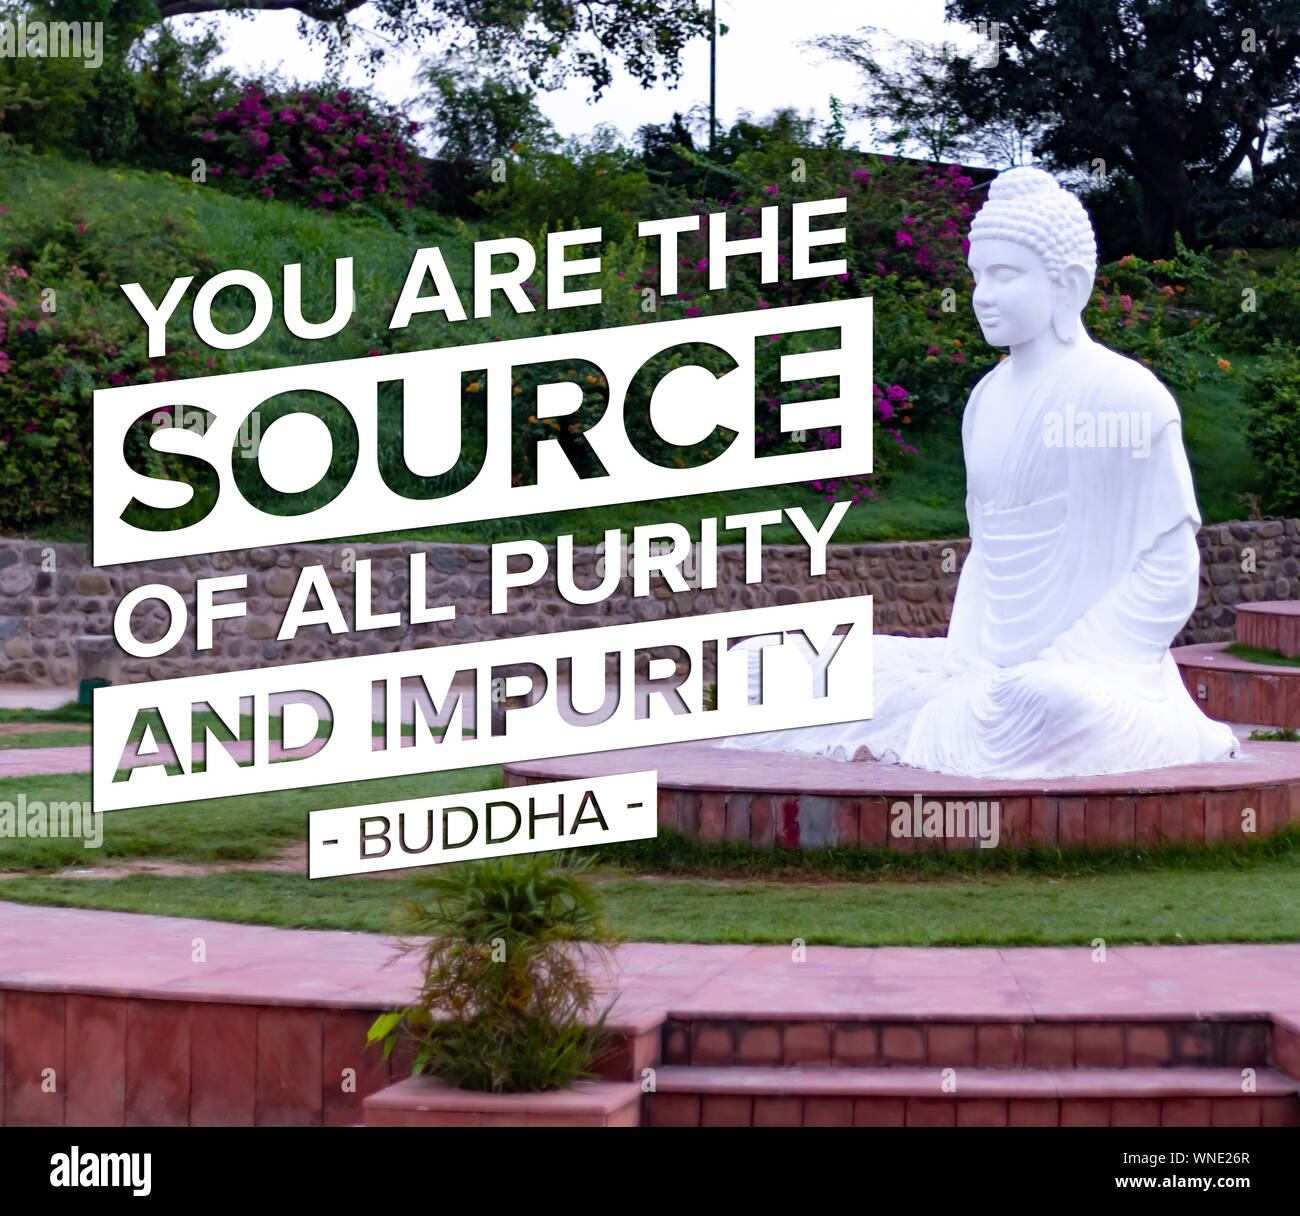 You are the source of all purity and impurity - buddha Stock Photo